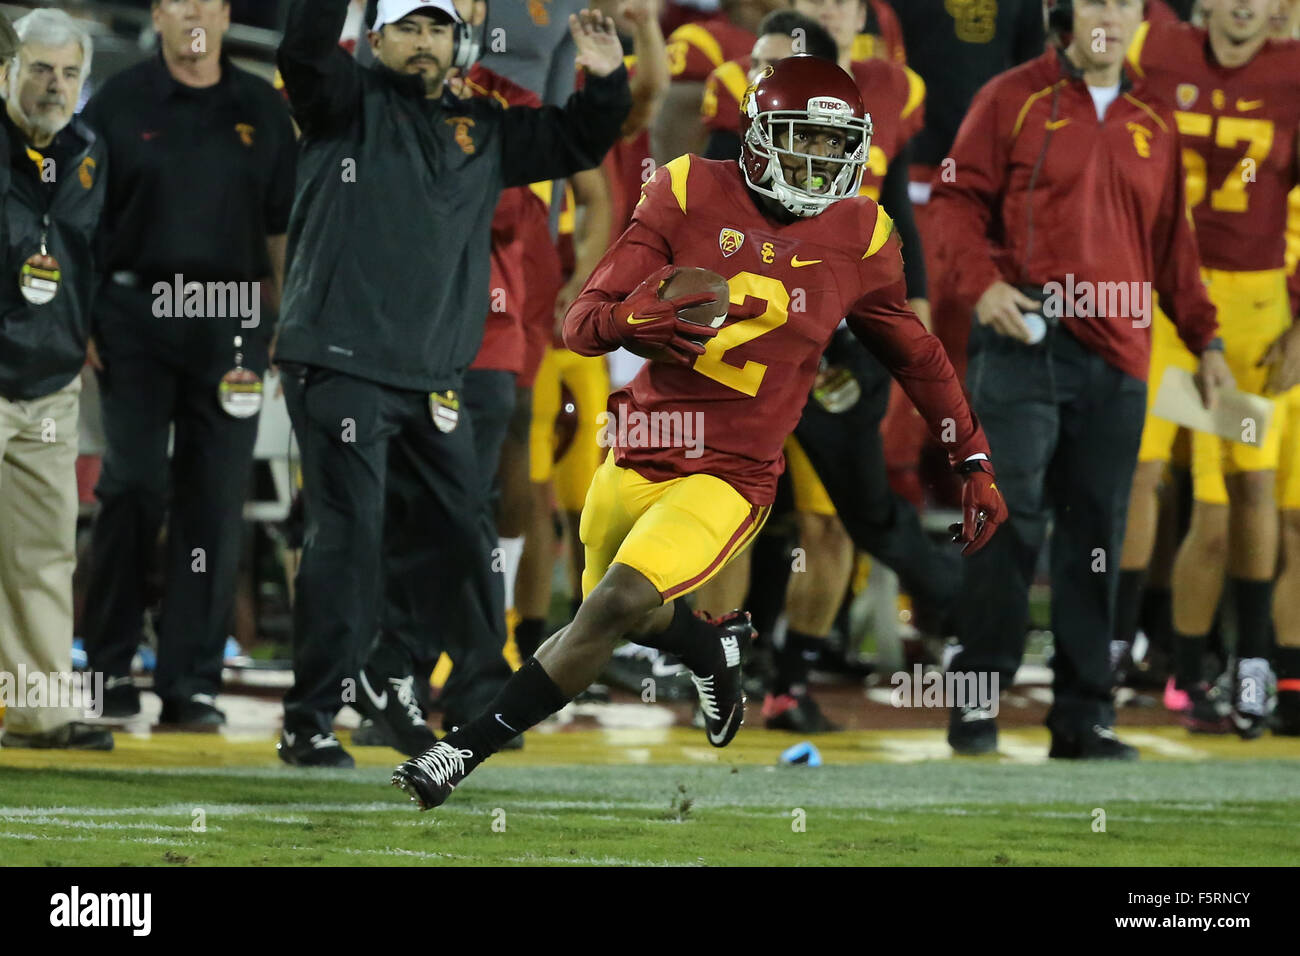 Nov. 7, 2015 - Los Angeles, CA, US - November 7, 2015: USC Trojans cornerback Adoree' Jackson (2) finds some running room in the game between the Arizona Wildcats and the USC Trojans, The Coliseum in Los Angeles, CA. Photographer: Peter Joneleit - Zuma Wire Service (Credit Image: © Peter Joneleit via ZUMA Wire) Stock Photo